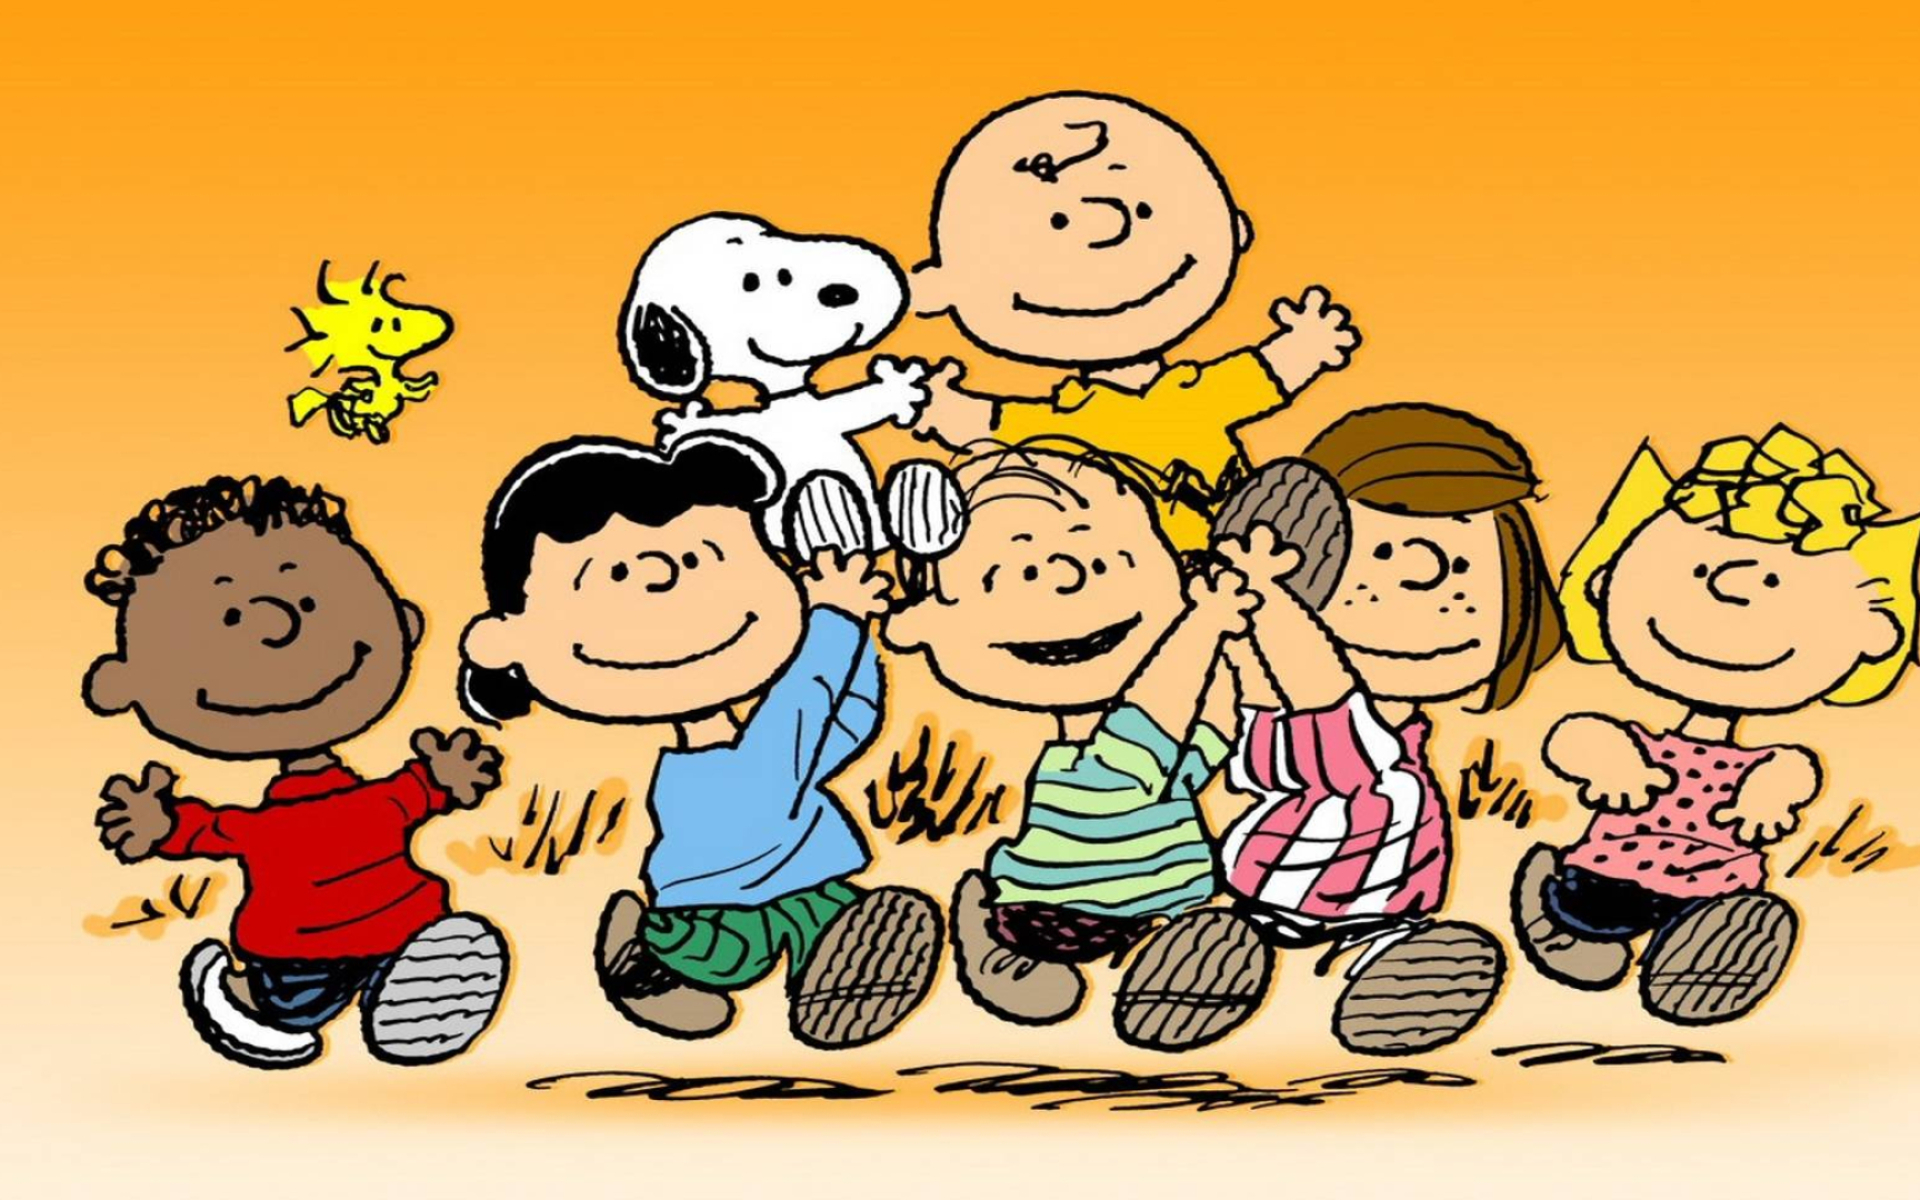 1920x1200 Free download Snoopy The gang from Snoopy [] for your Desktop, Mobile \u0026 Tablet | Explore 75+ Peanuts Characters Wallpaper | Free Peanuts Desktop Wallpaper, Peanuts Gang Fall Wallpaper, Peanuts Holiday Wallpaper